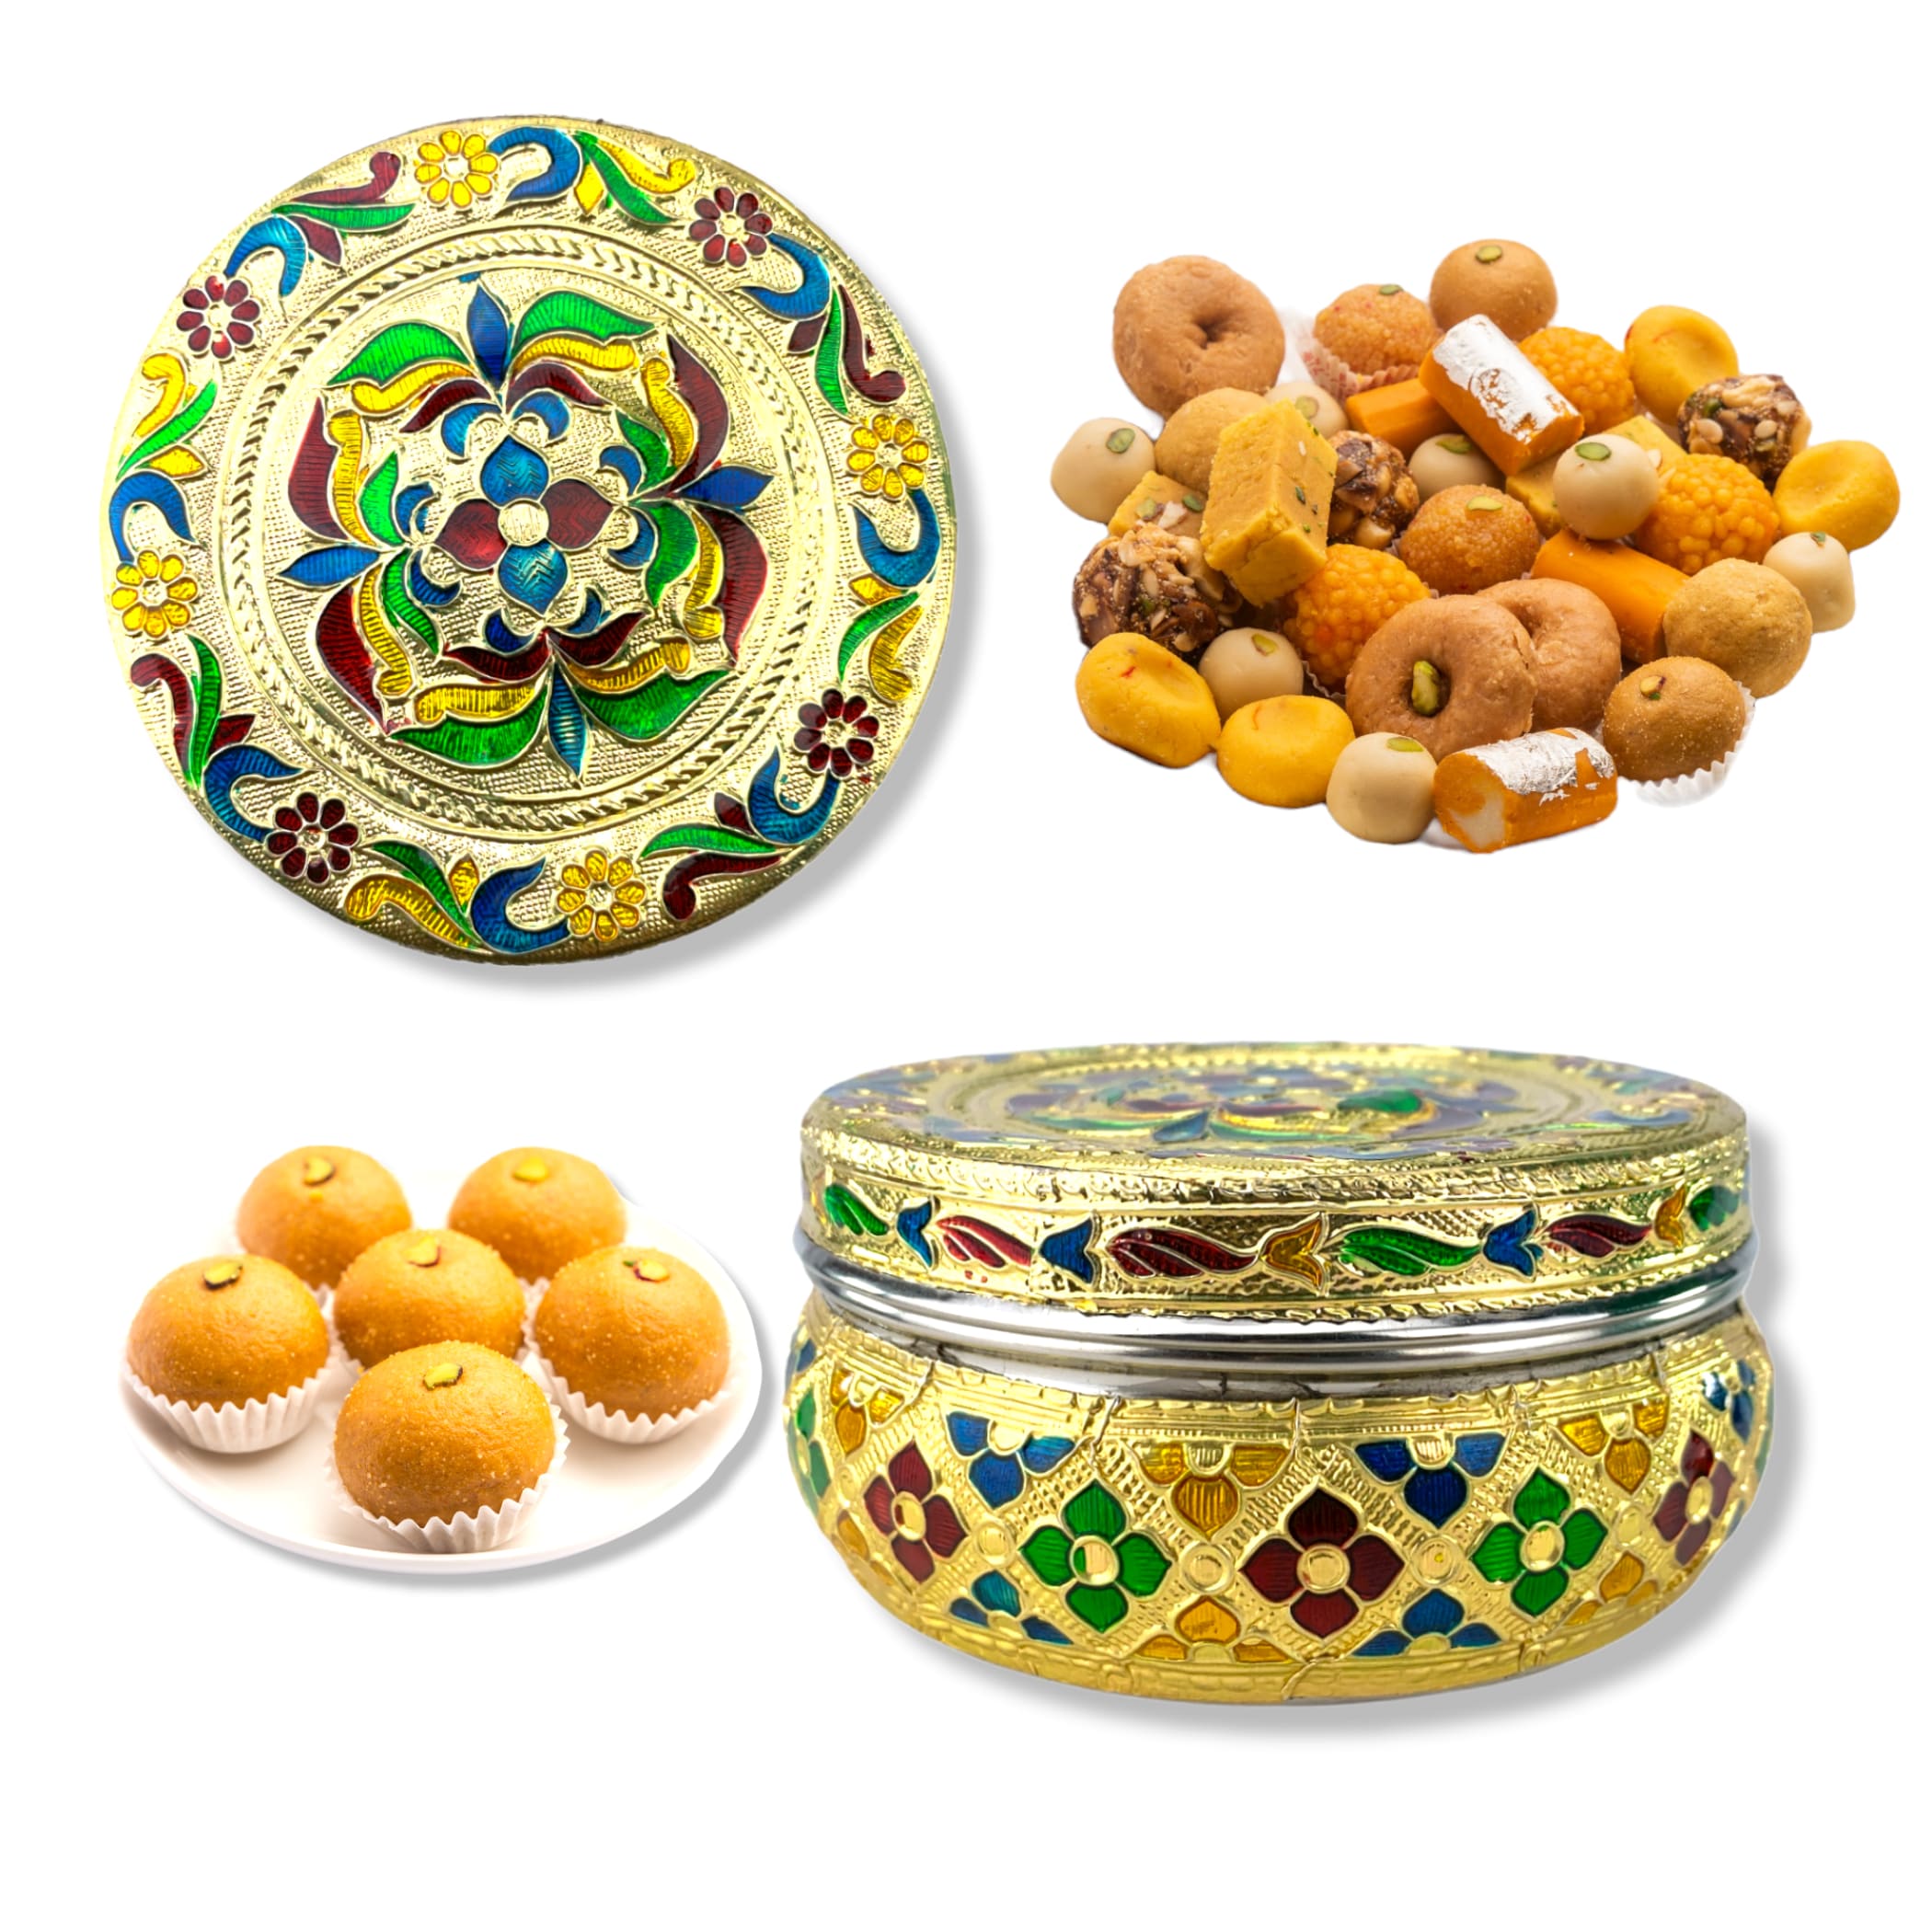 https://cdn.shopify.com/s/files/1/0549/6910/6583/products/4ct-steel-sweet-box-spice-ladoo-storage-mehndi-favors-mithai-desi-gift-boxes-indian-favor-603.jpg